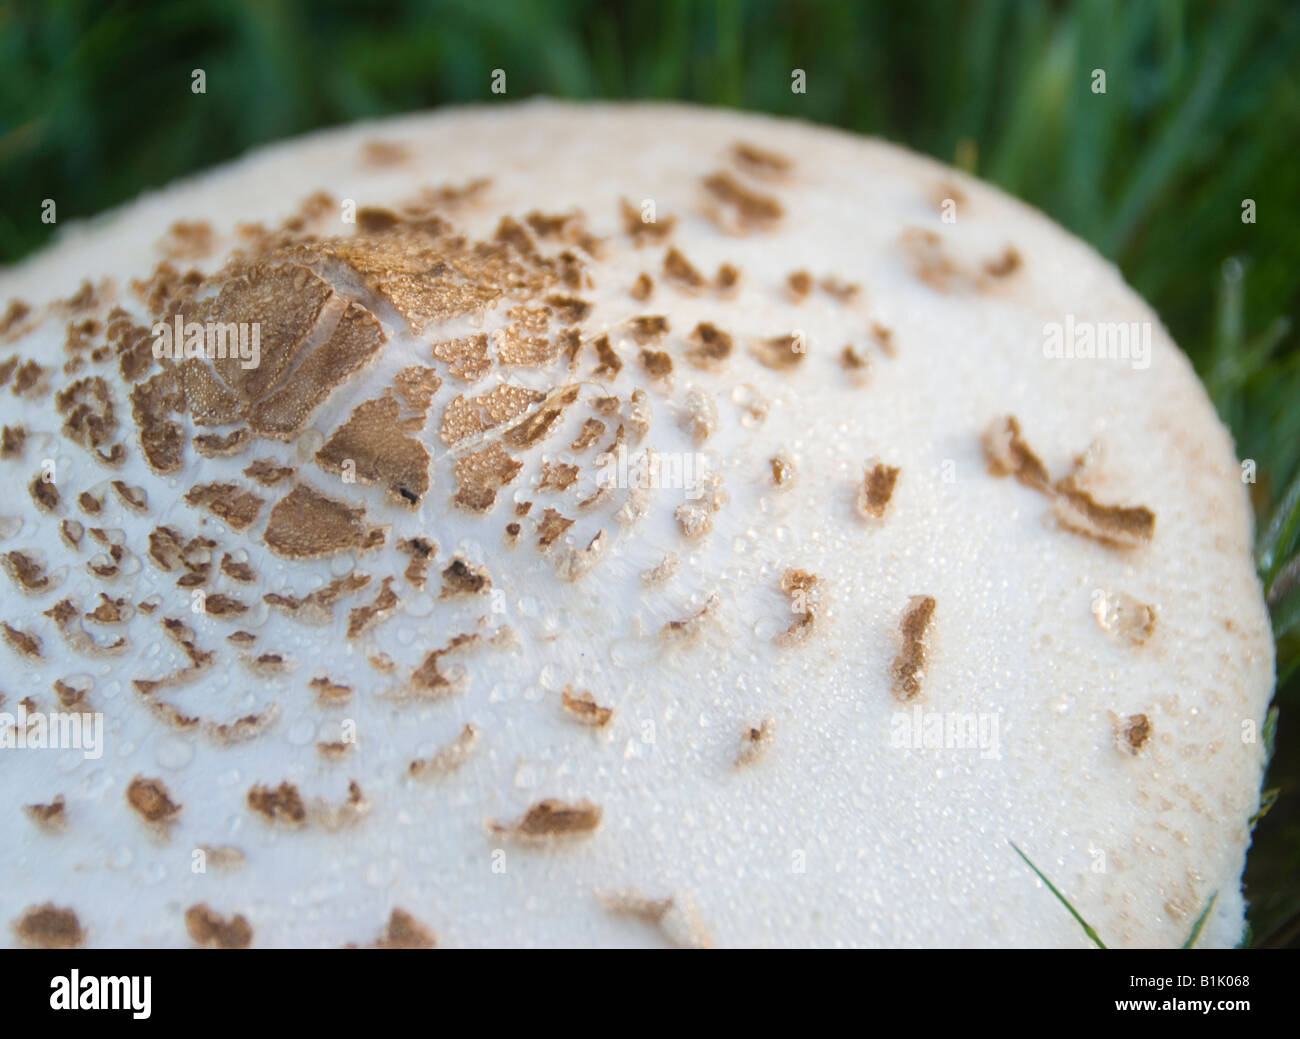 A mushroom growing wild in the countryside Stock Photo